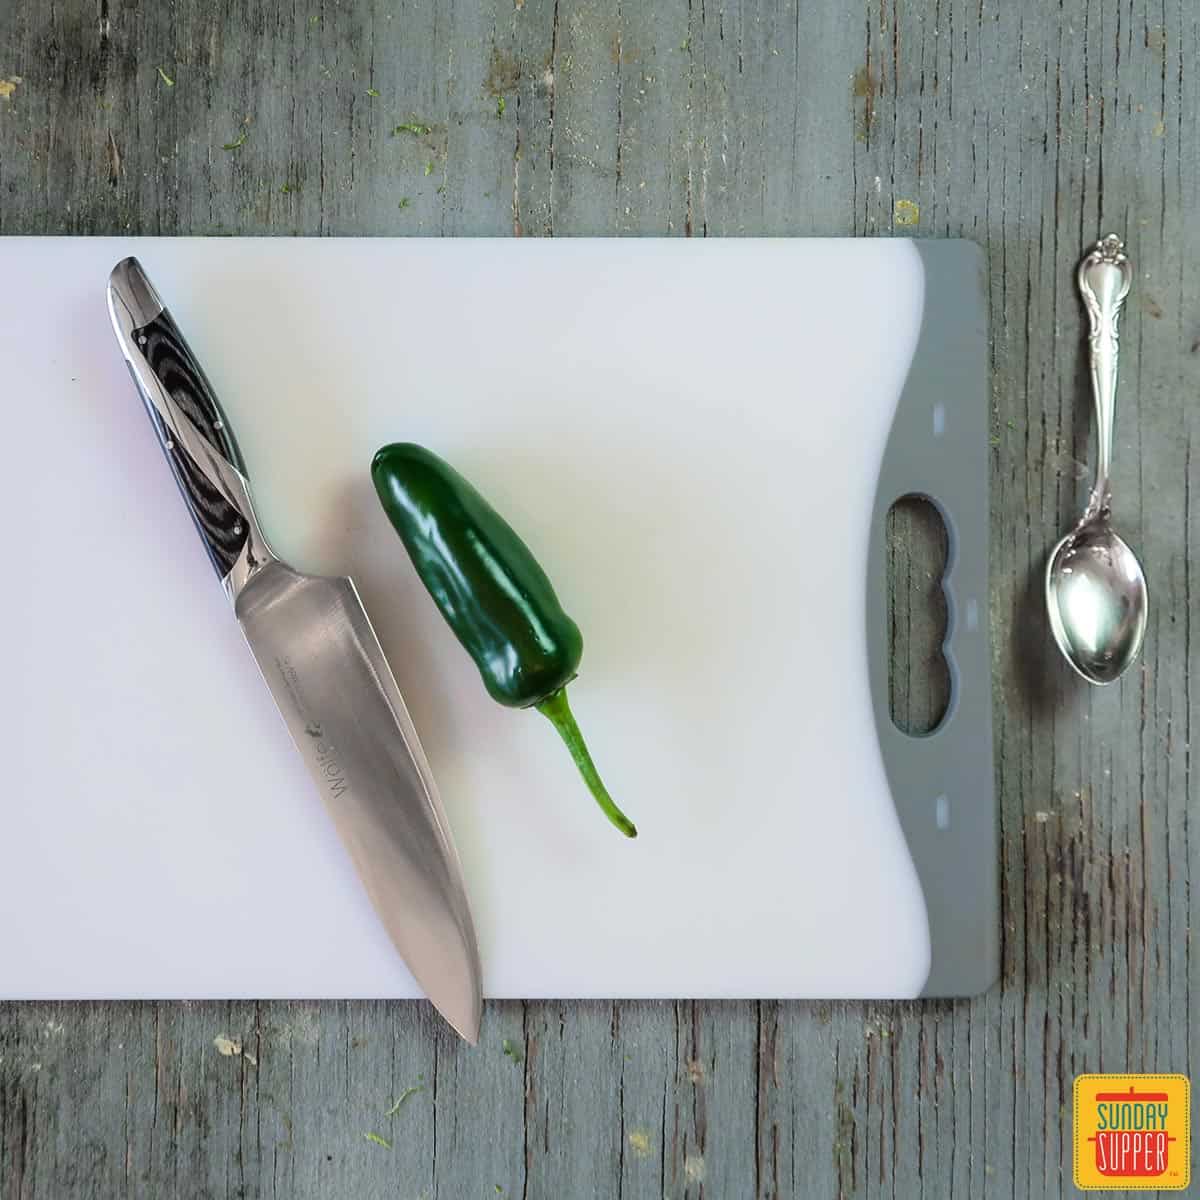 A cutting board with a jalapeno and knife next to a spoon, getting ready to show you how to cut a jalapeno